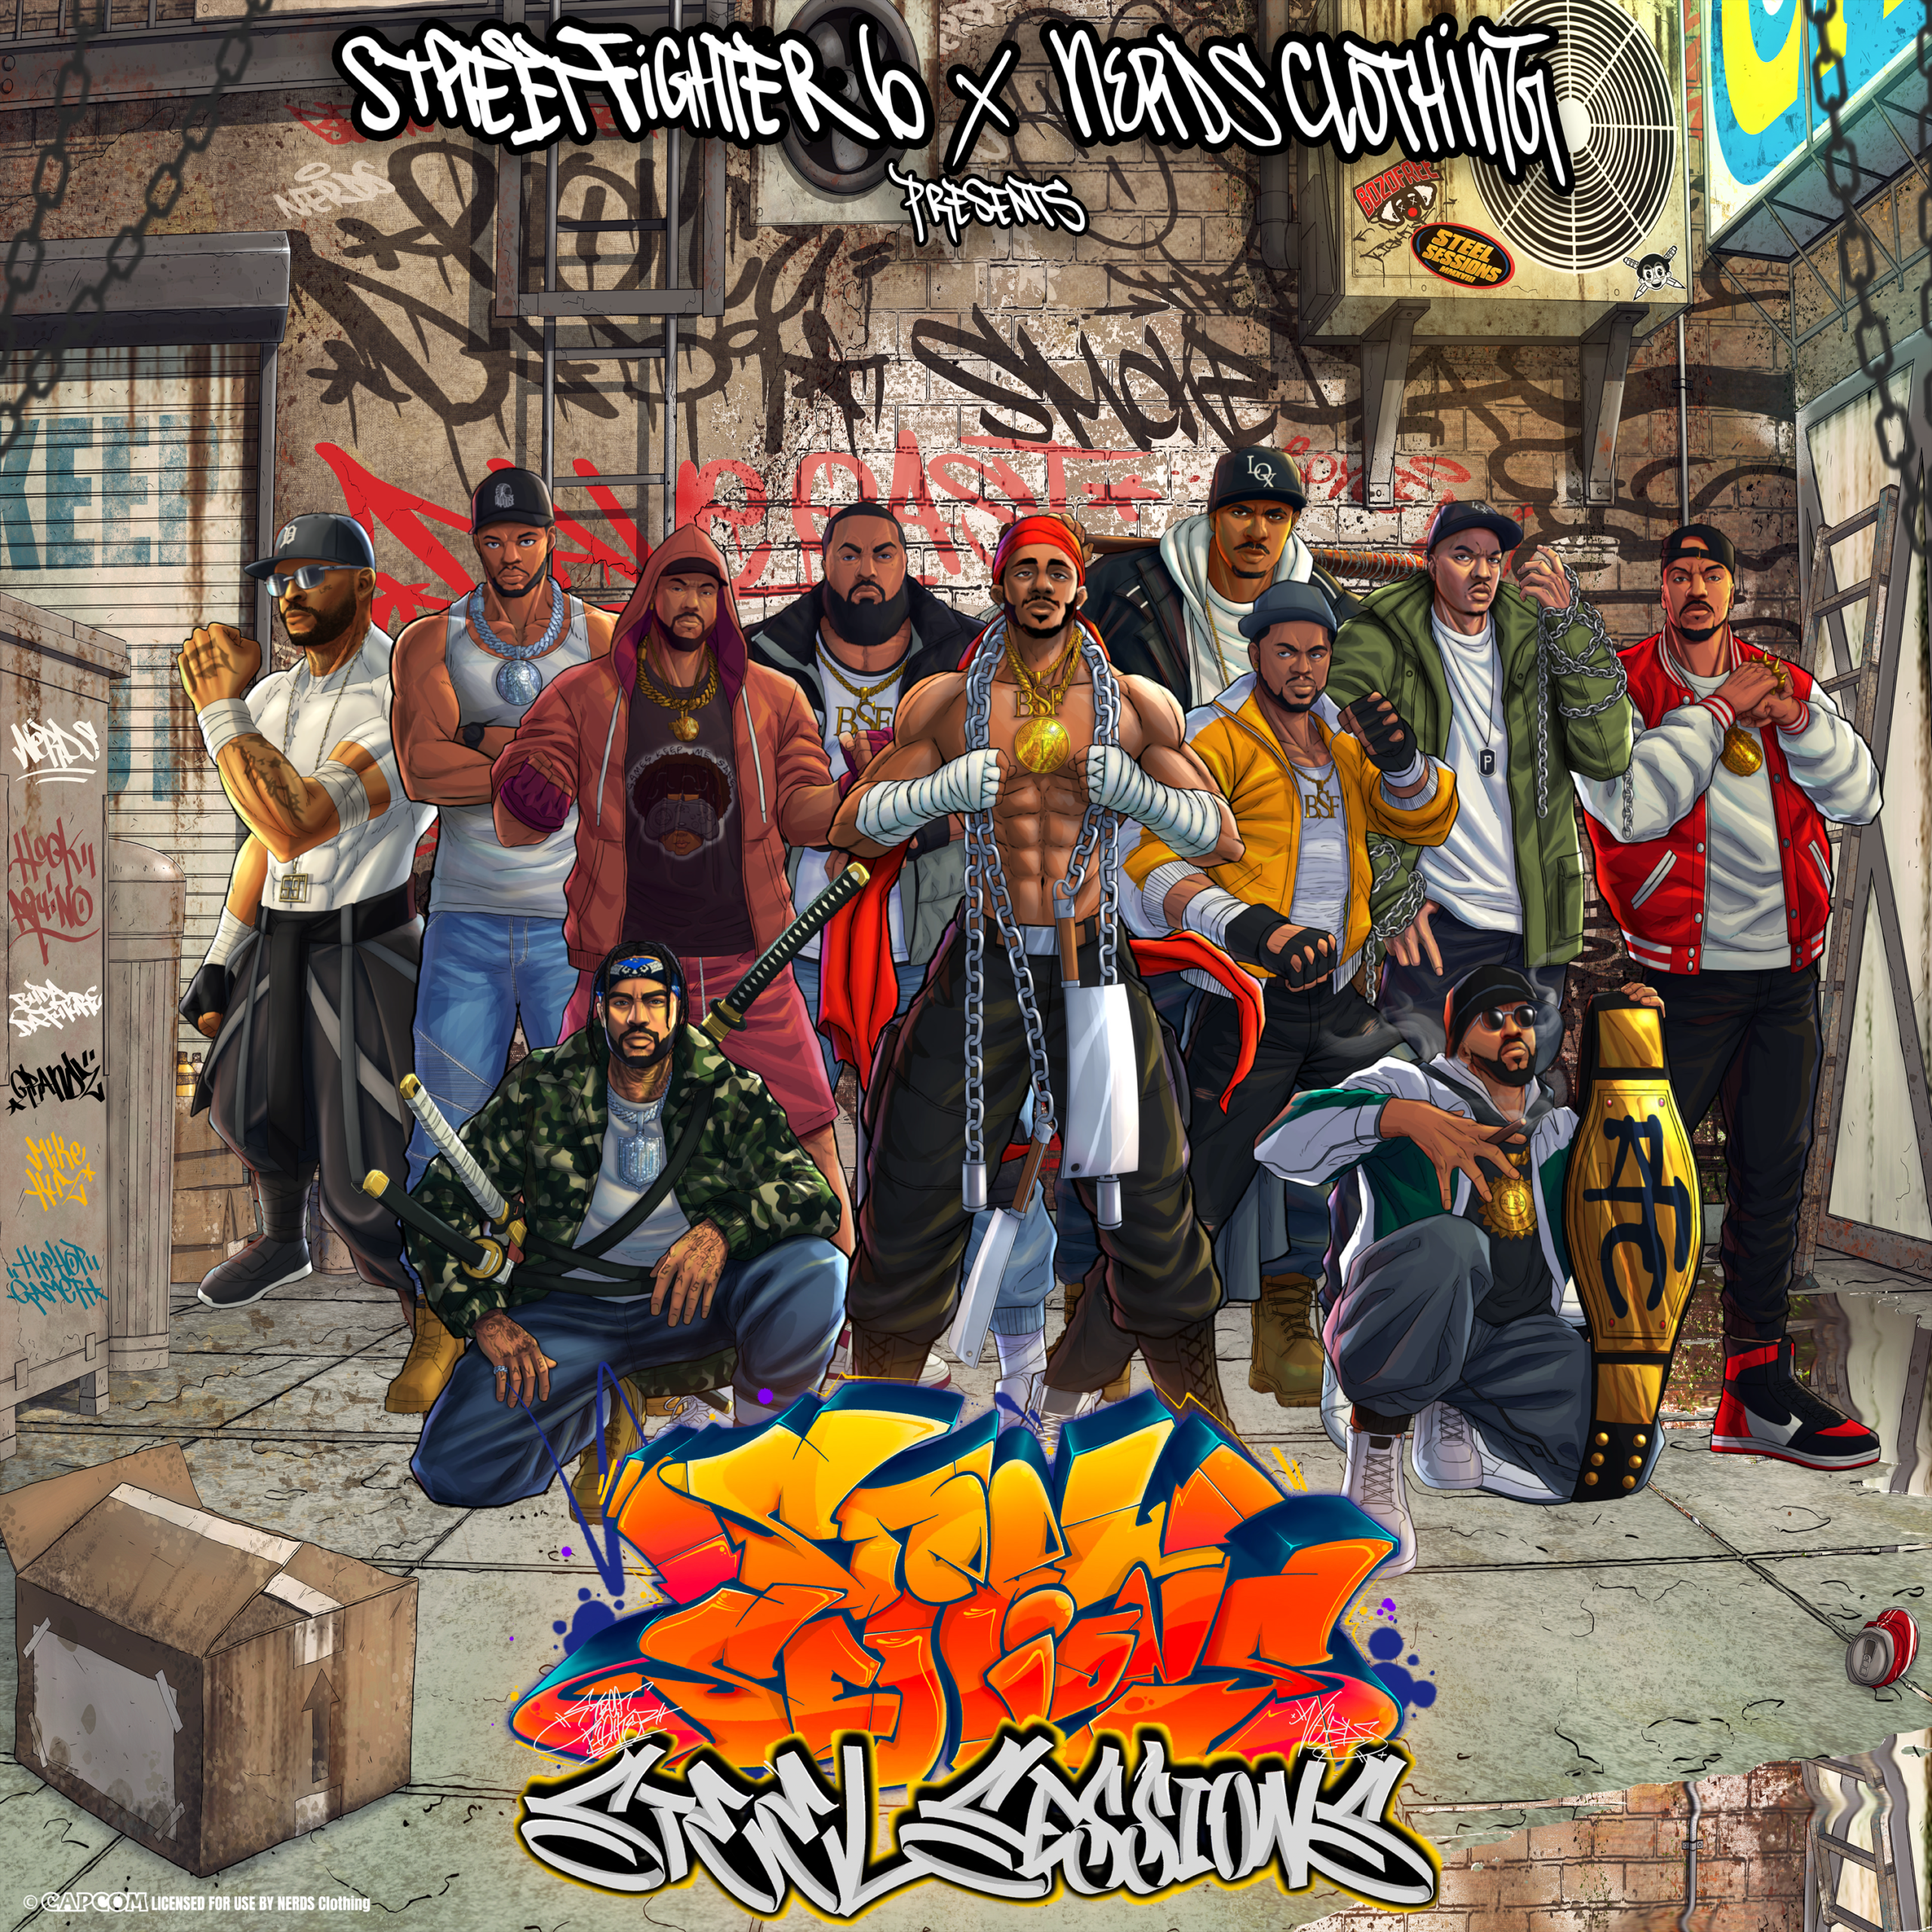 MNRK Music Group Drops ‘Street Fighter 6 x NERDS Clothing Presents Steel Sessions’ Soundtrack